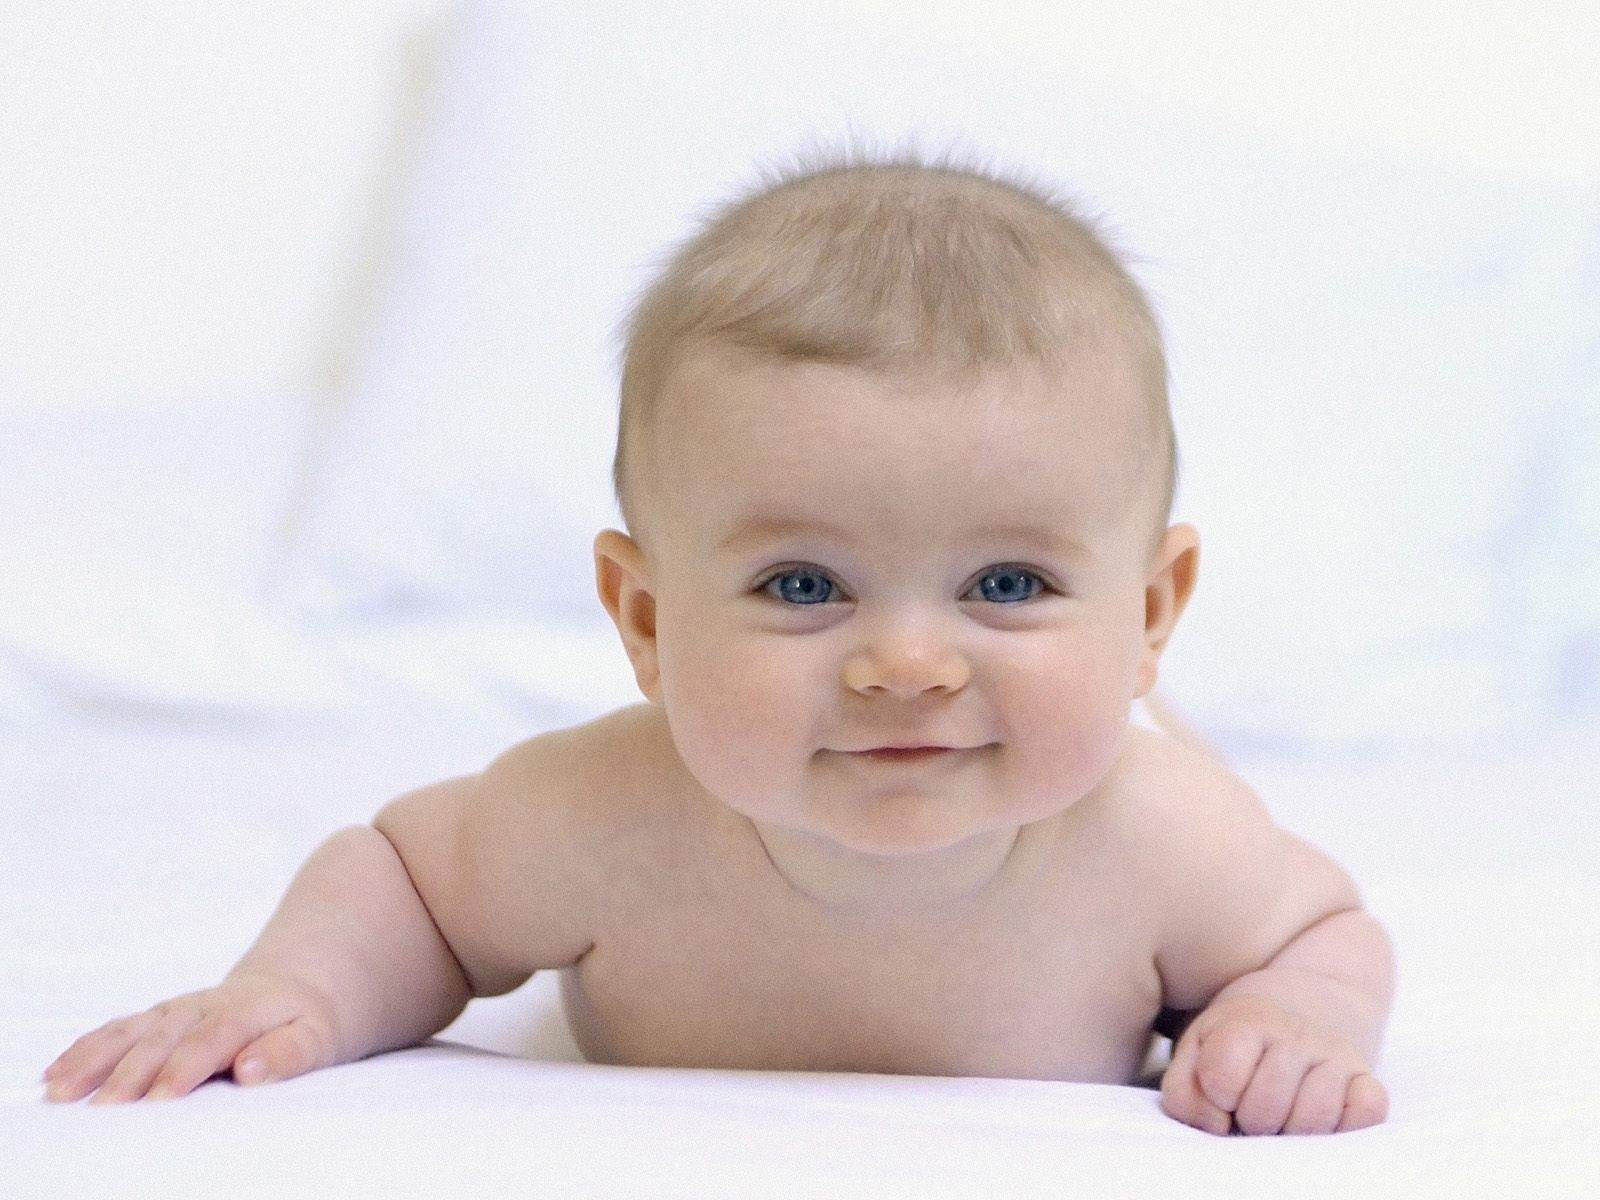 Free Photos Of Cute Babies - Wallpapers High Definition